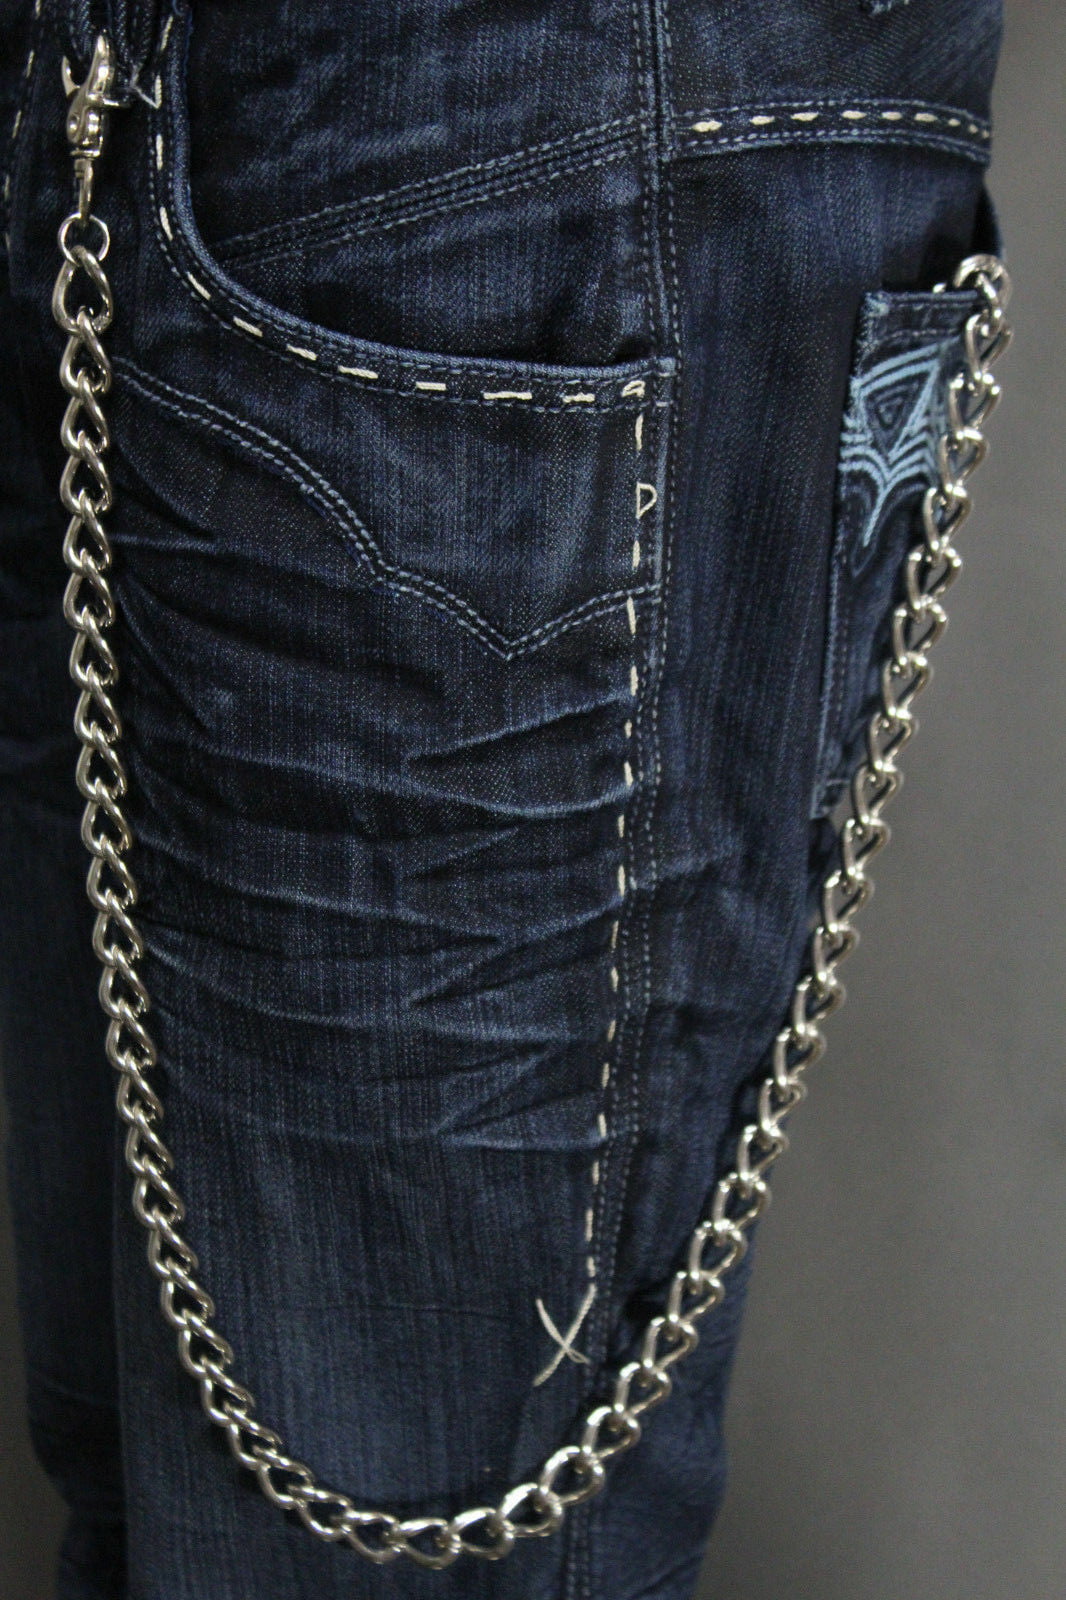 Alwaystyle4You Men's Strong Chunky Jean Biker Wallet Chain